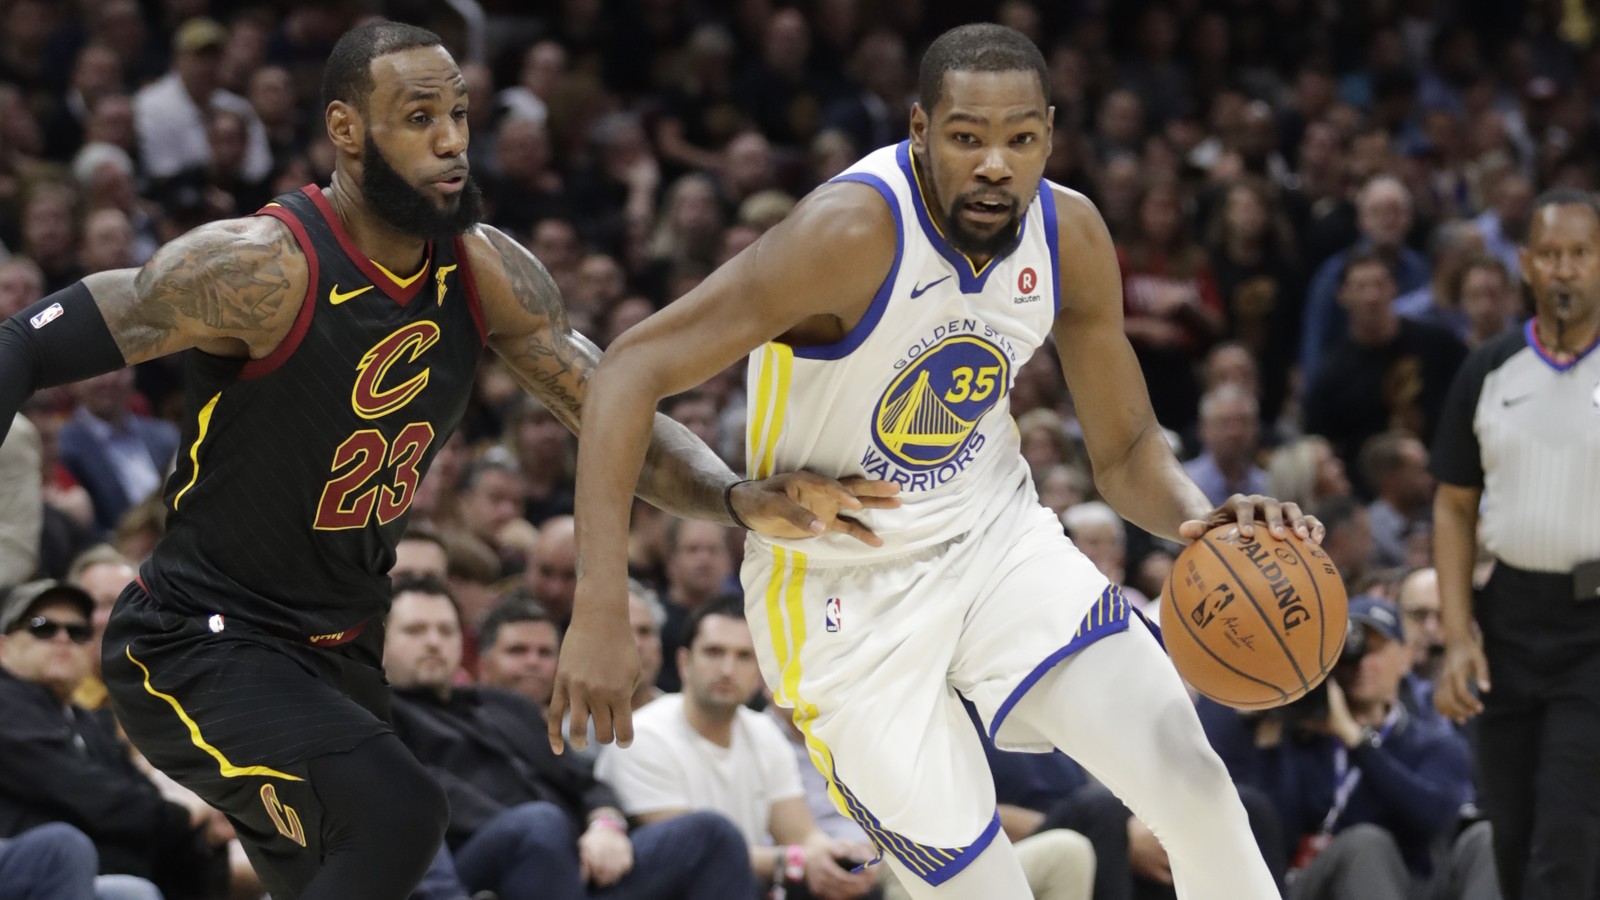 NBA - The Golden State Warriors defeat the Cleveland Cavaliers 108